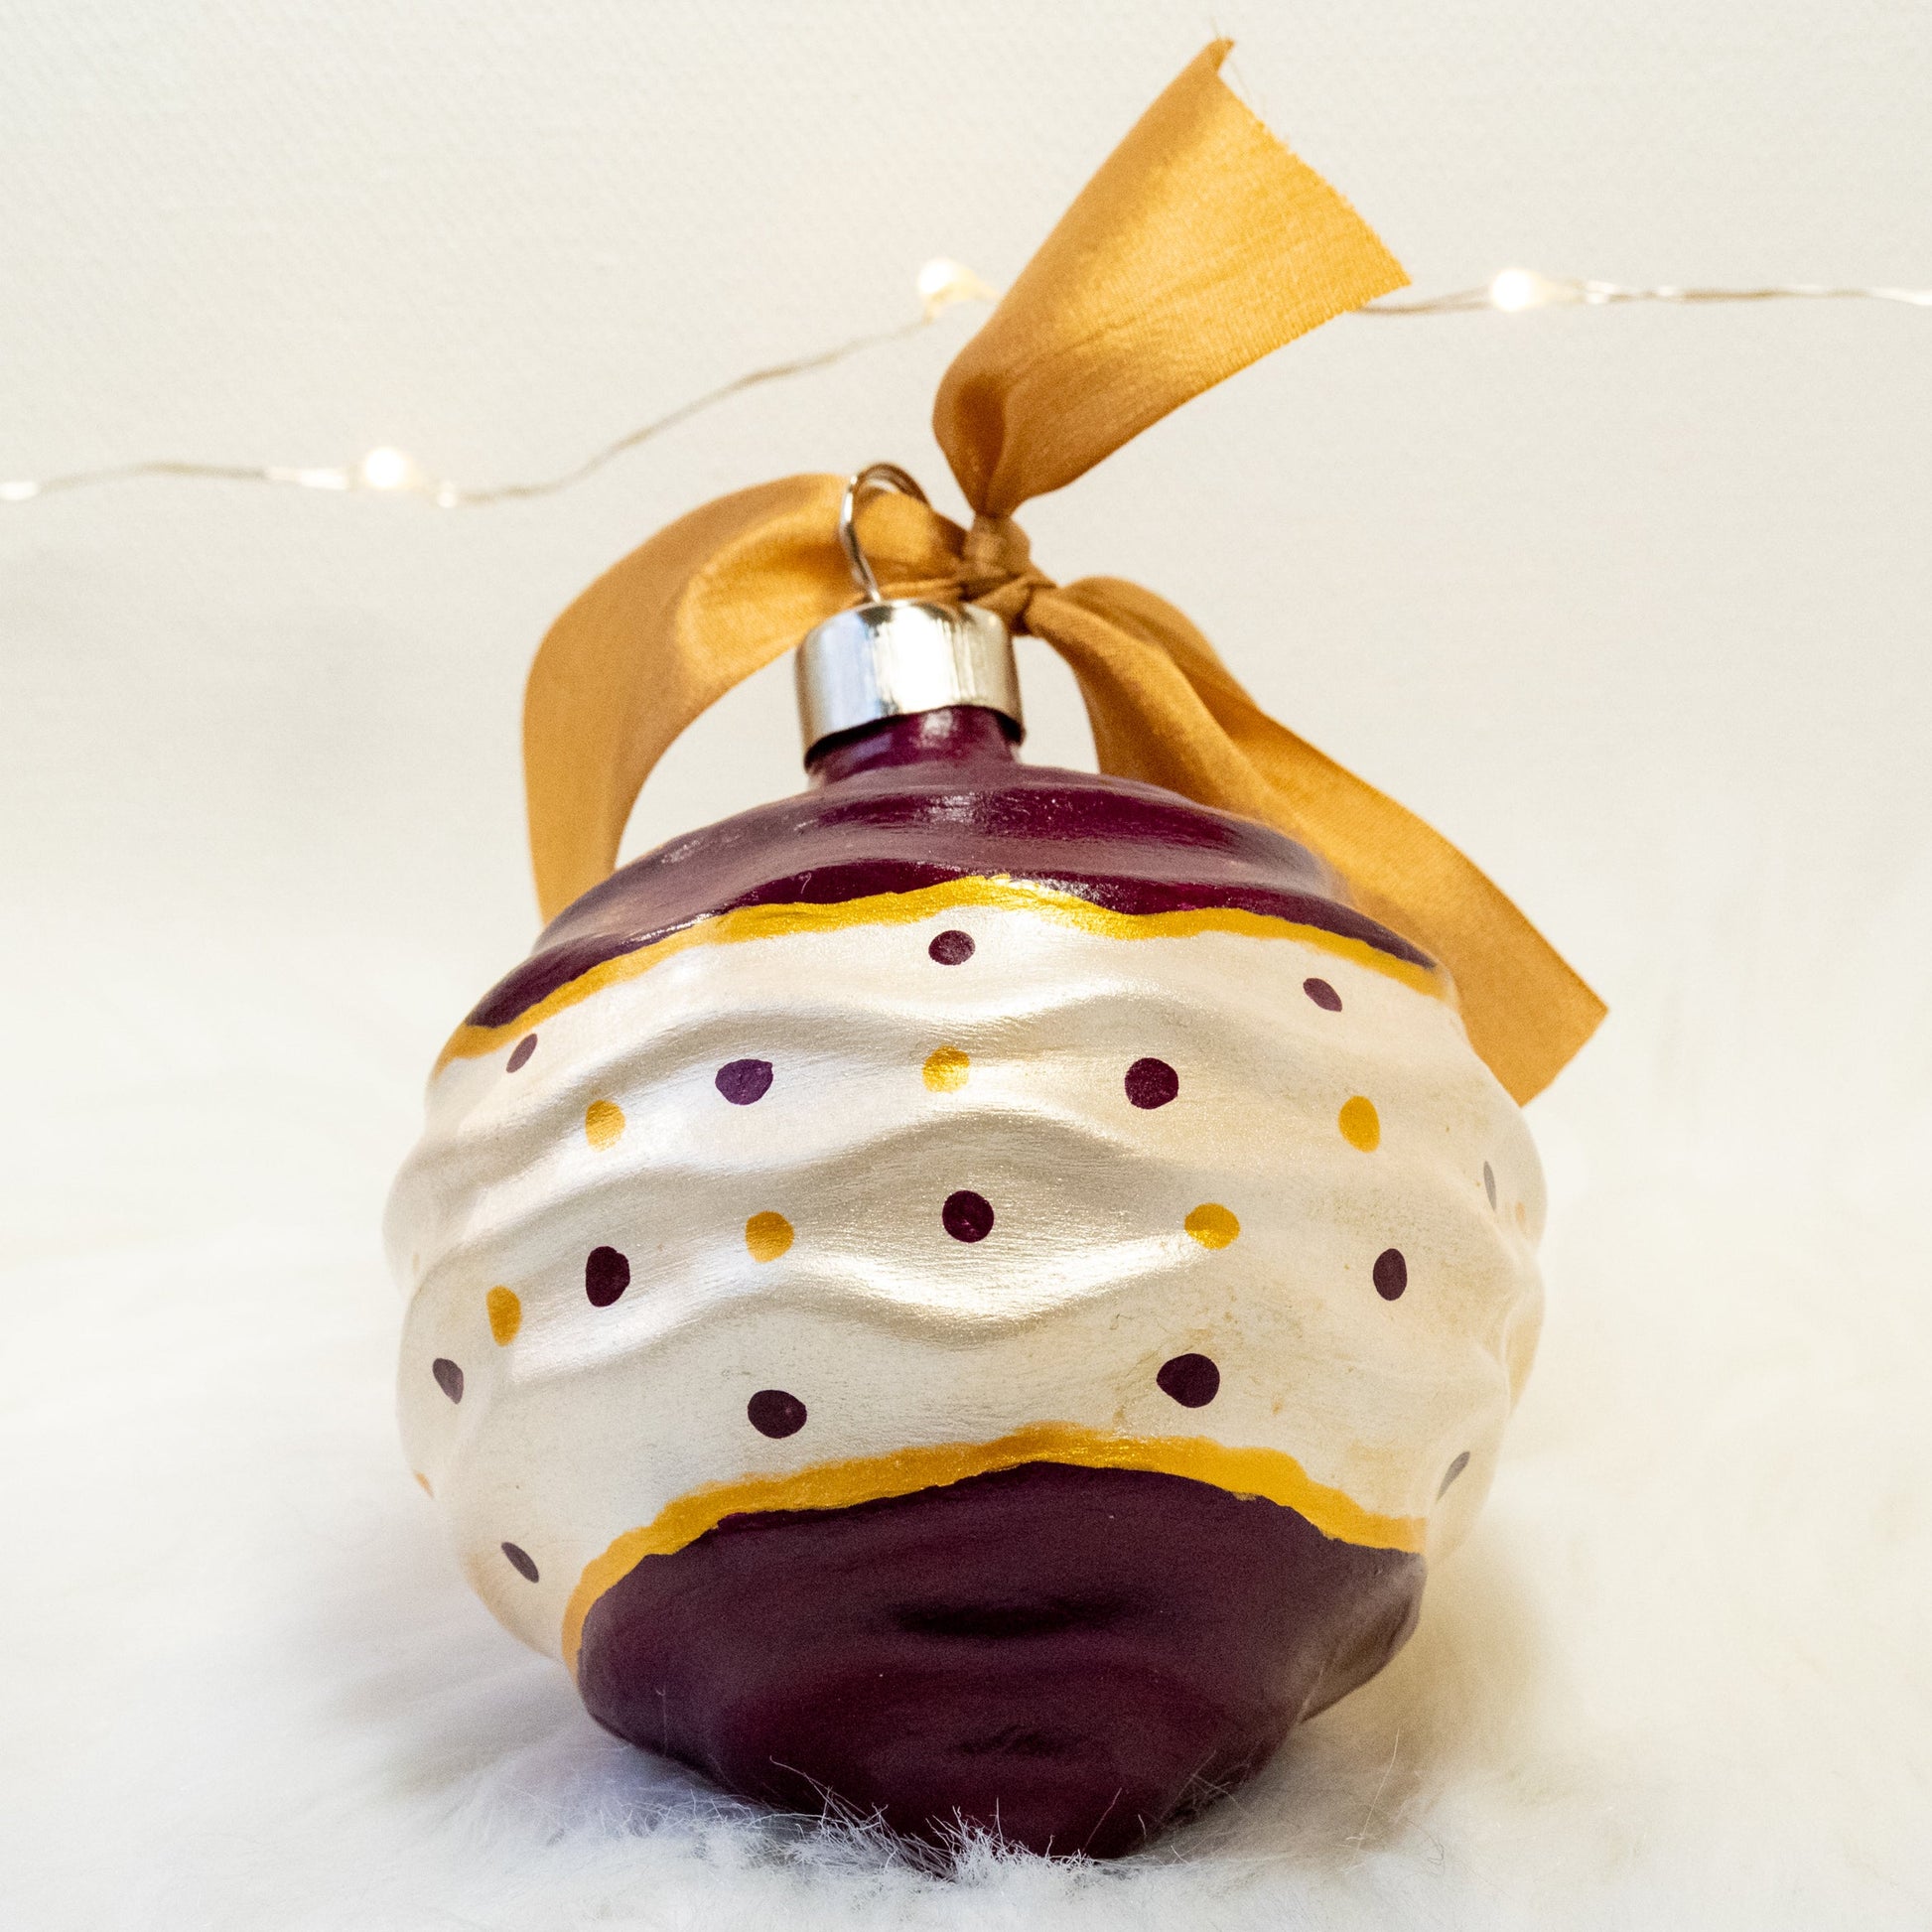 The Tracy Hand Painted Ornament features a white metallic and deep magenta base coat with deep magenta and gold polka dots and gold accents. Painted using fluid acrylic and acryla gouache paints. Displayed on white faux fur with fairy lights in the background.